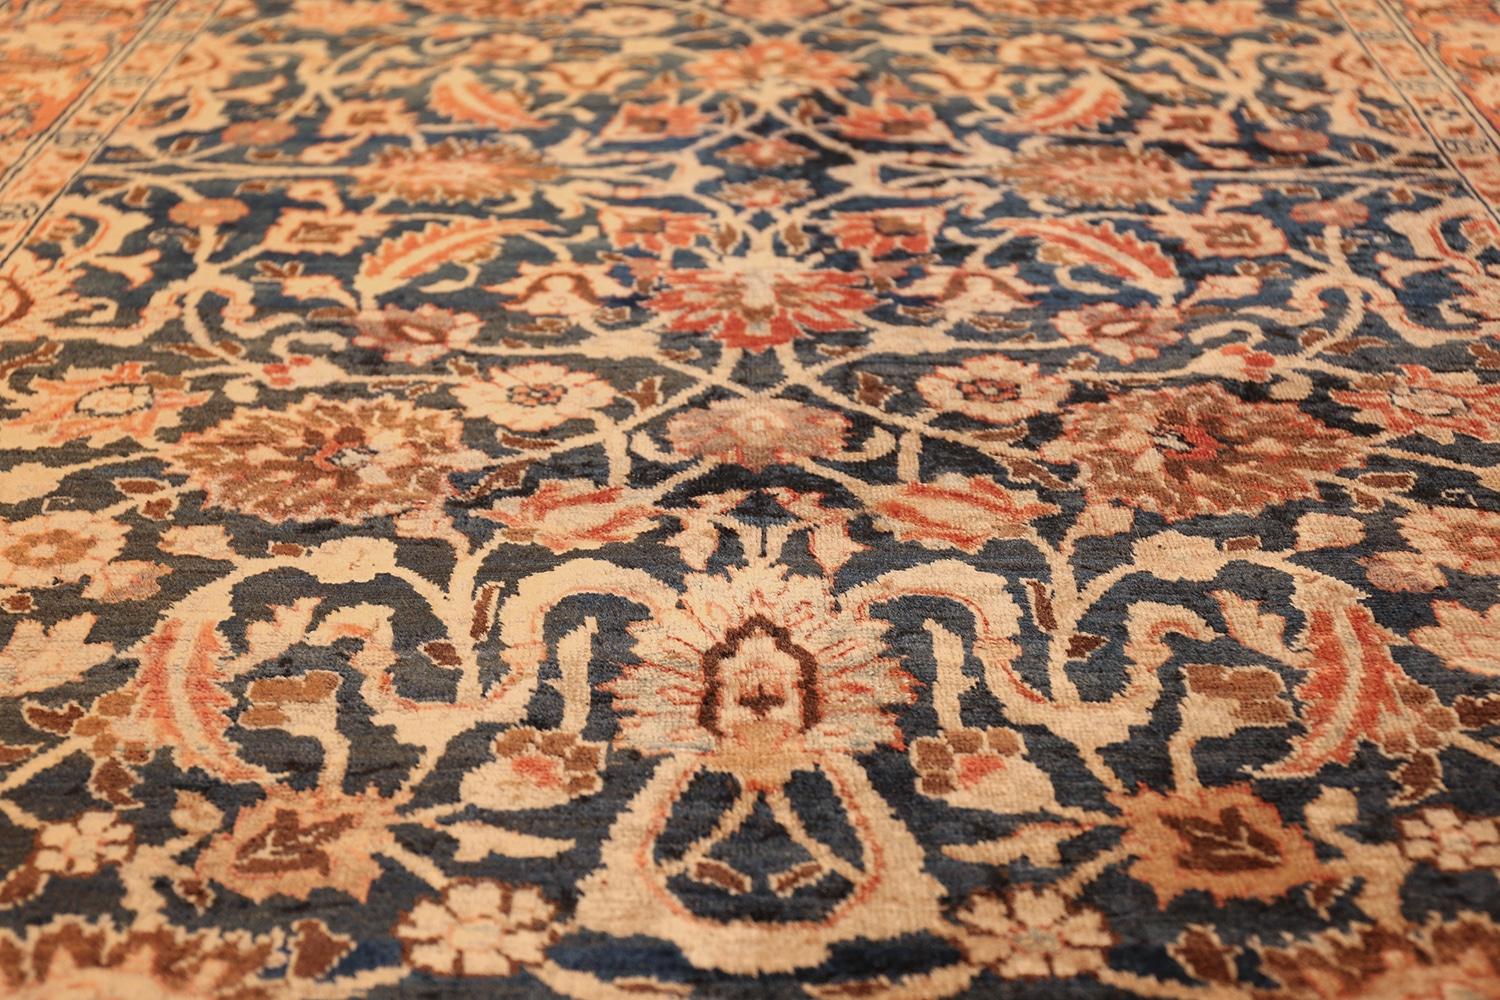 20th Century Small Size Blue Background Antique Persian Tabriz Rug. Size: 4' 7